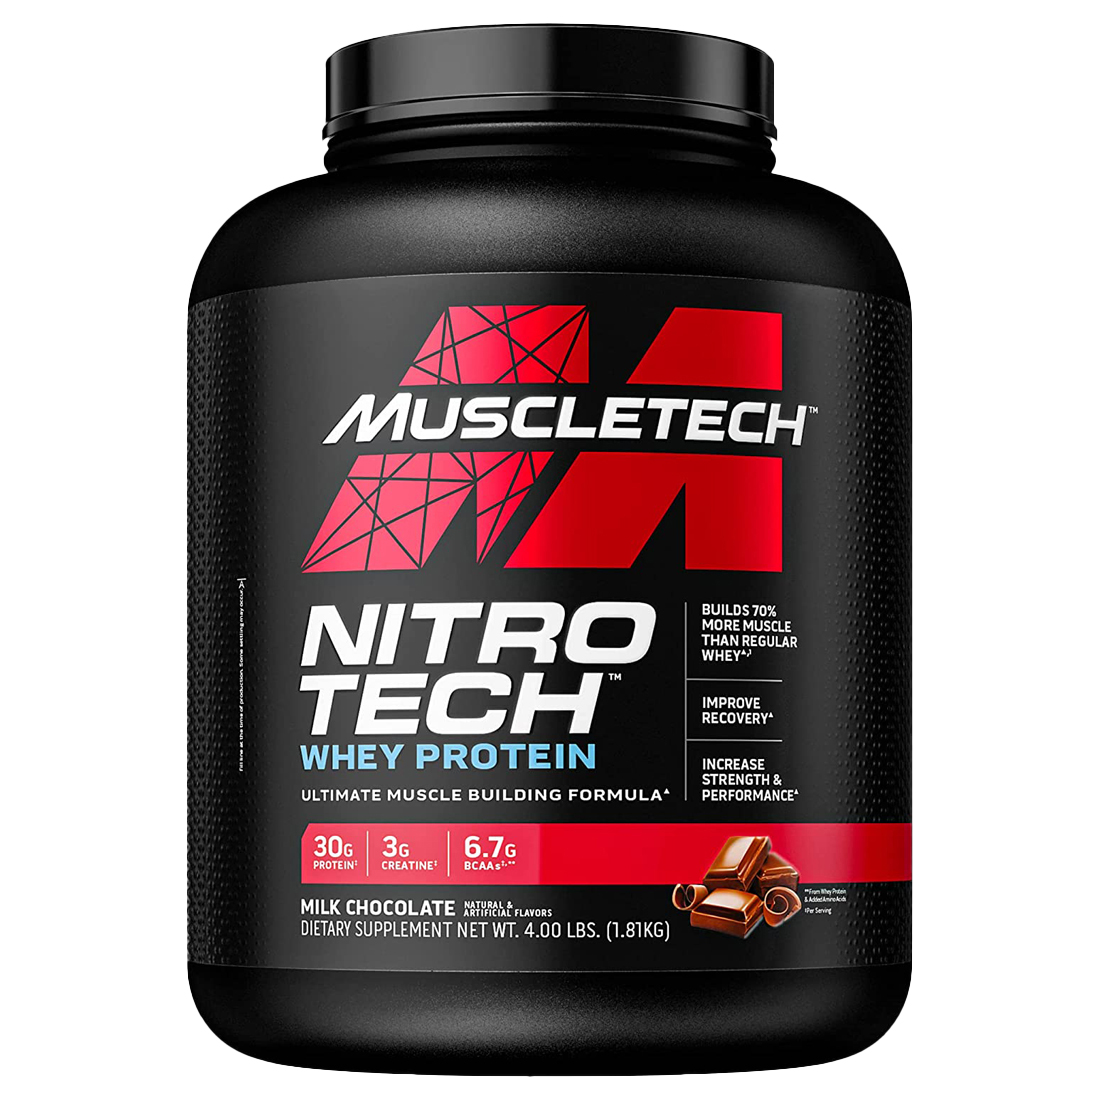 MUSCLETECH NitroTech Whey Protein Chocolate 